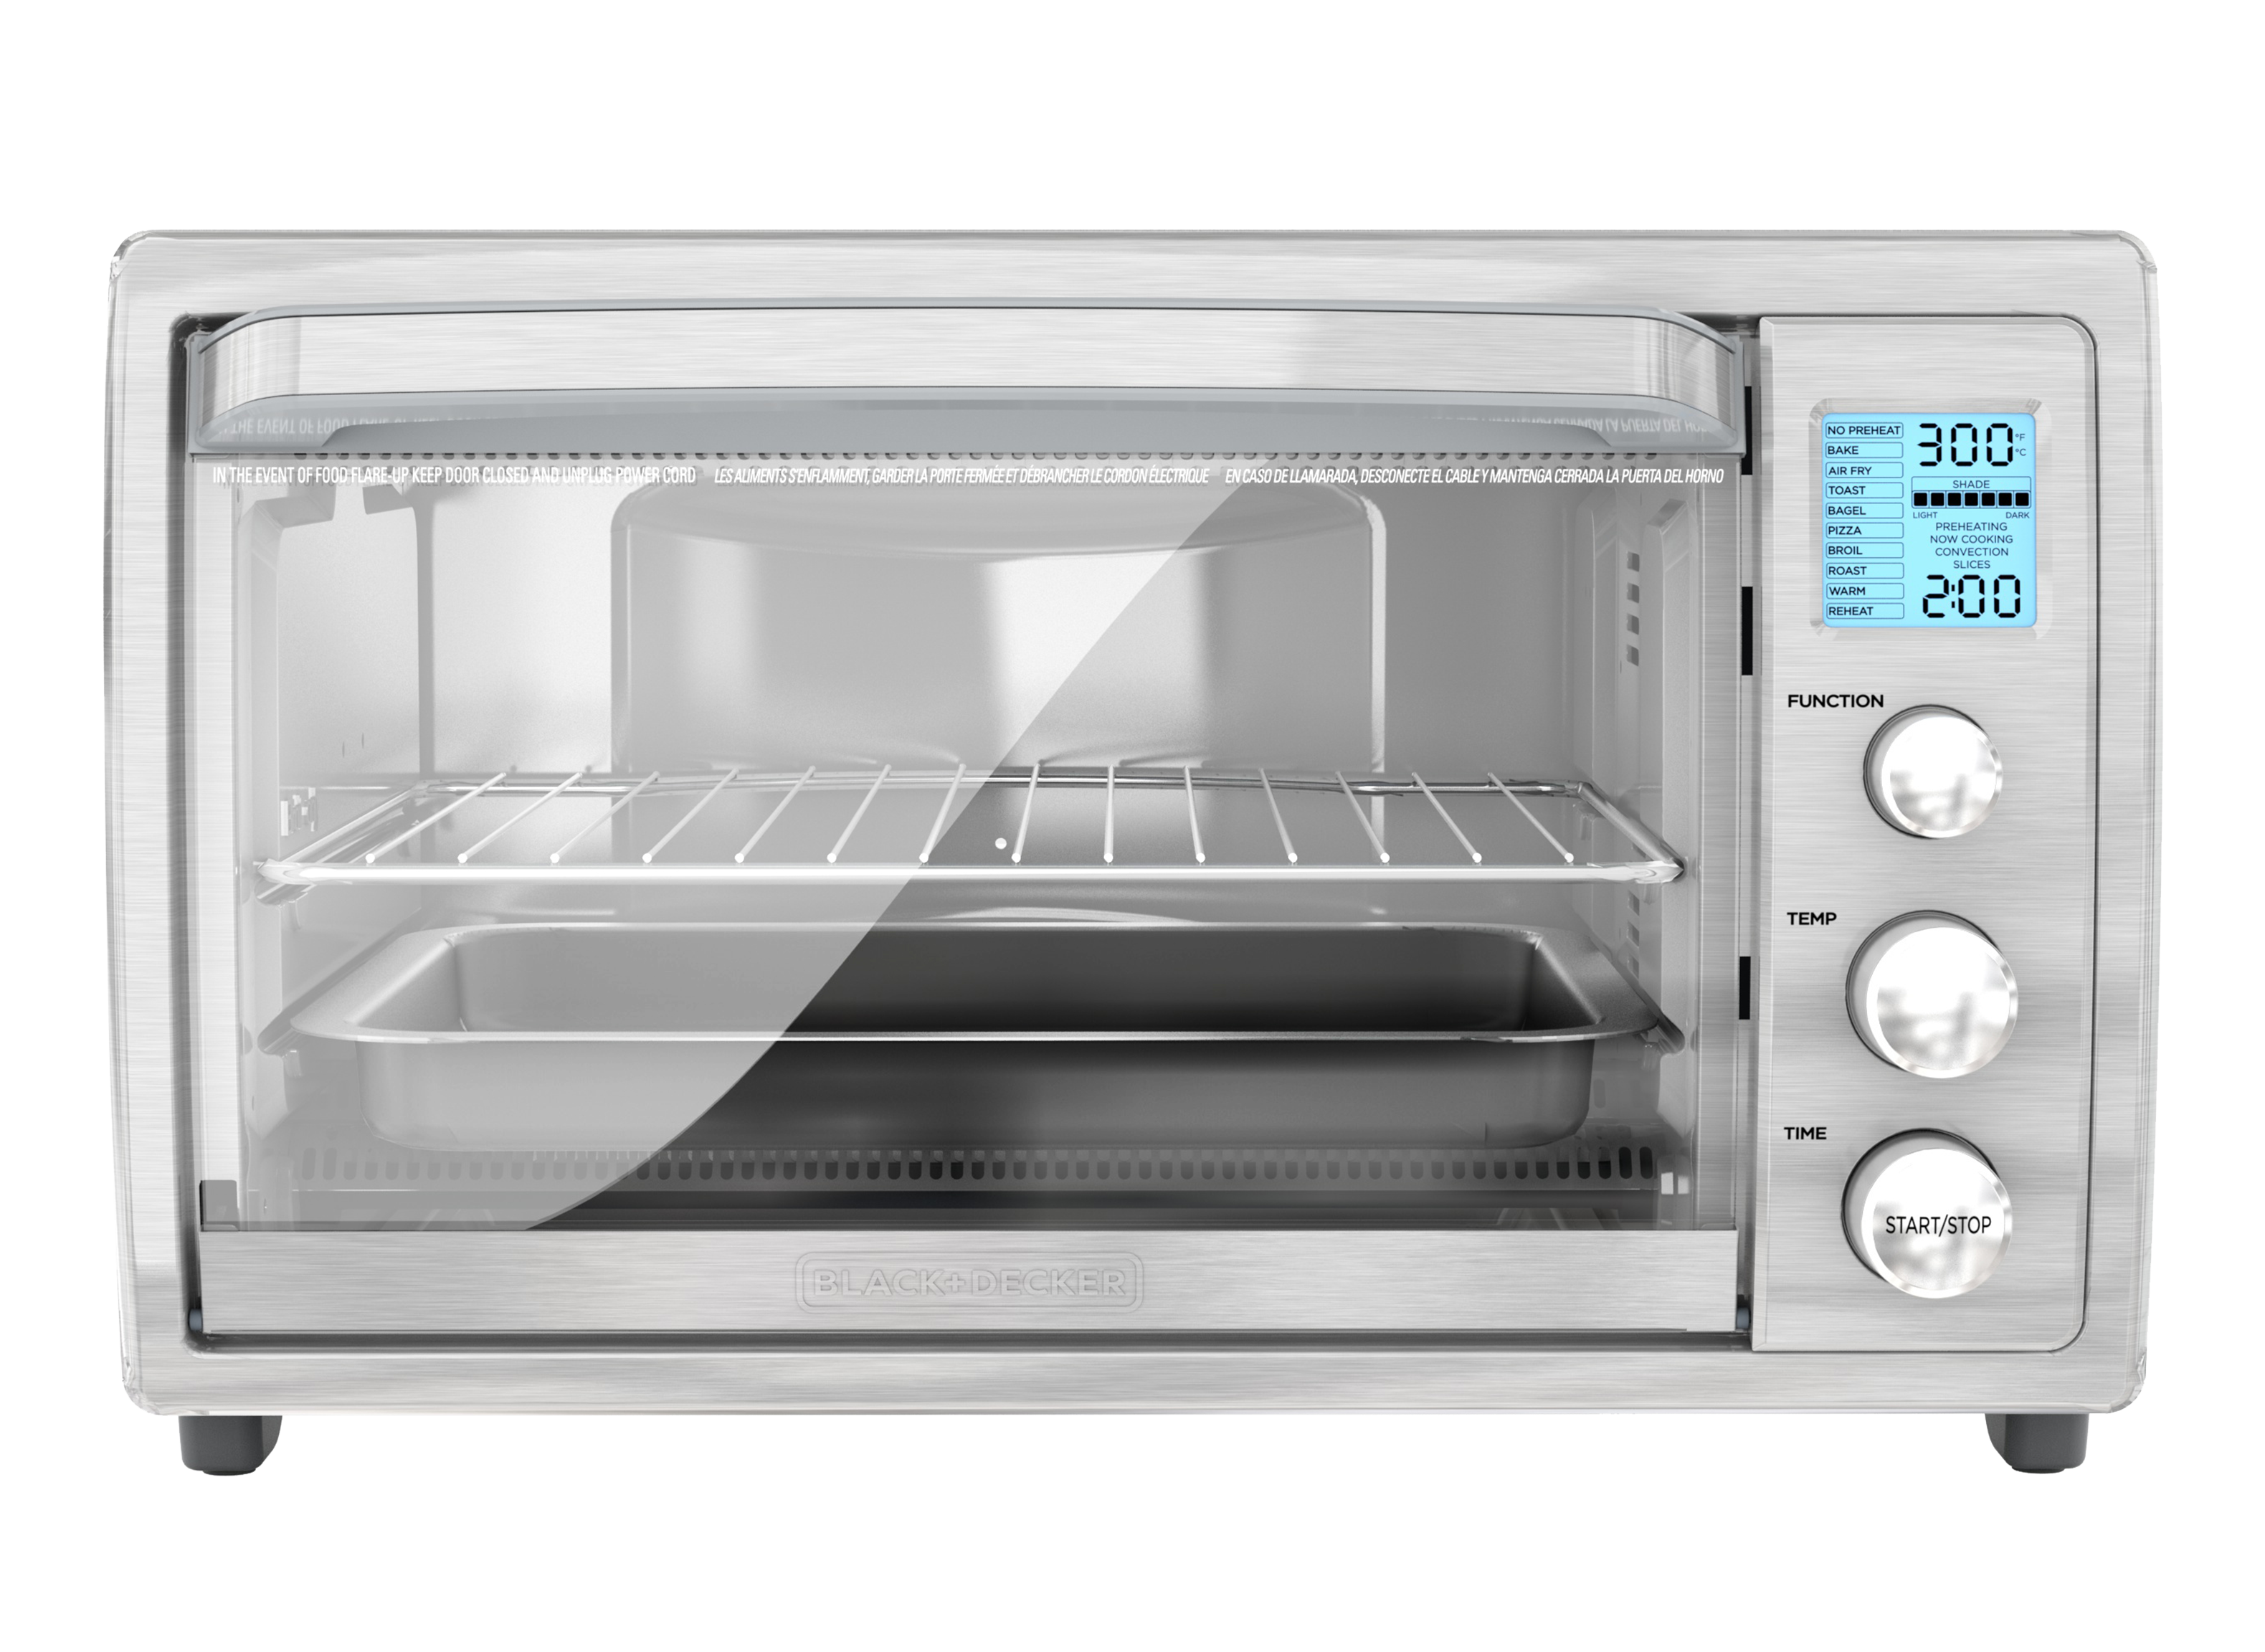 https://crdms.images.consumerreports.org/prod/products/cr/models/403032-toaster-ovens-black-decker-tod5035ss-10017894.png